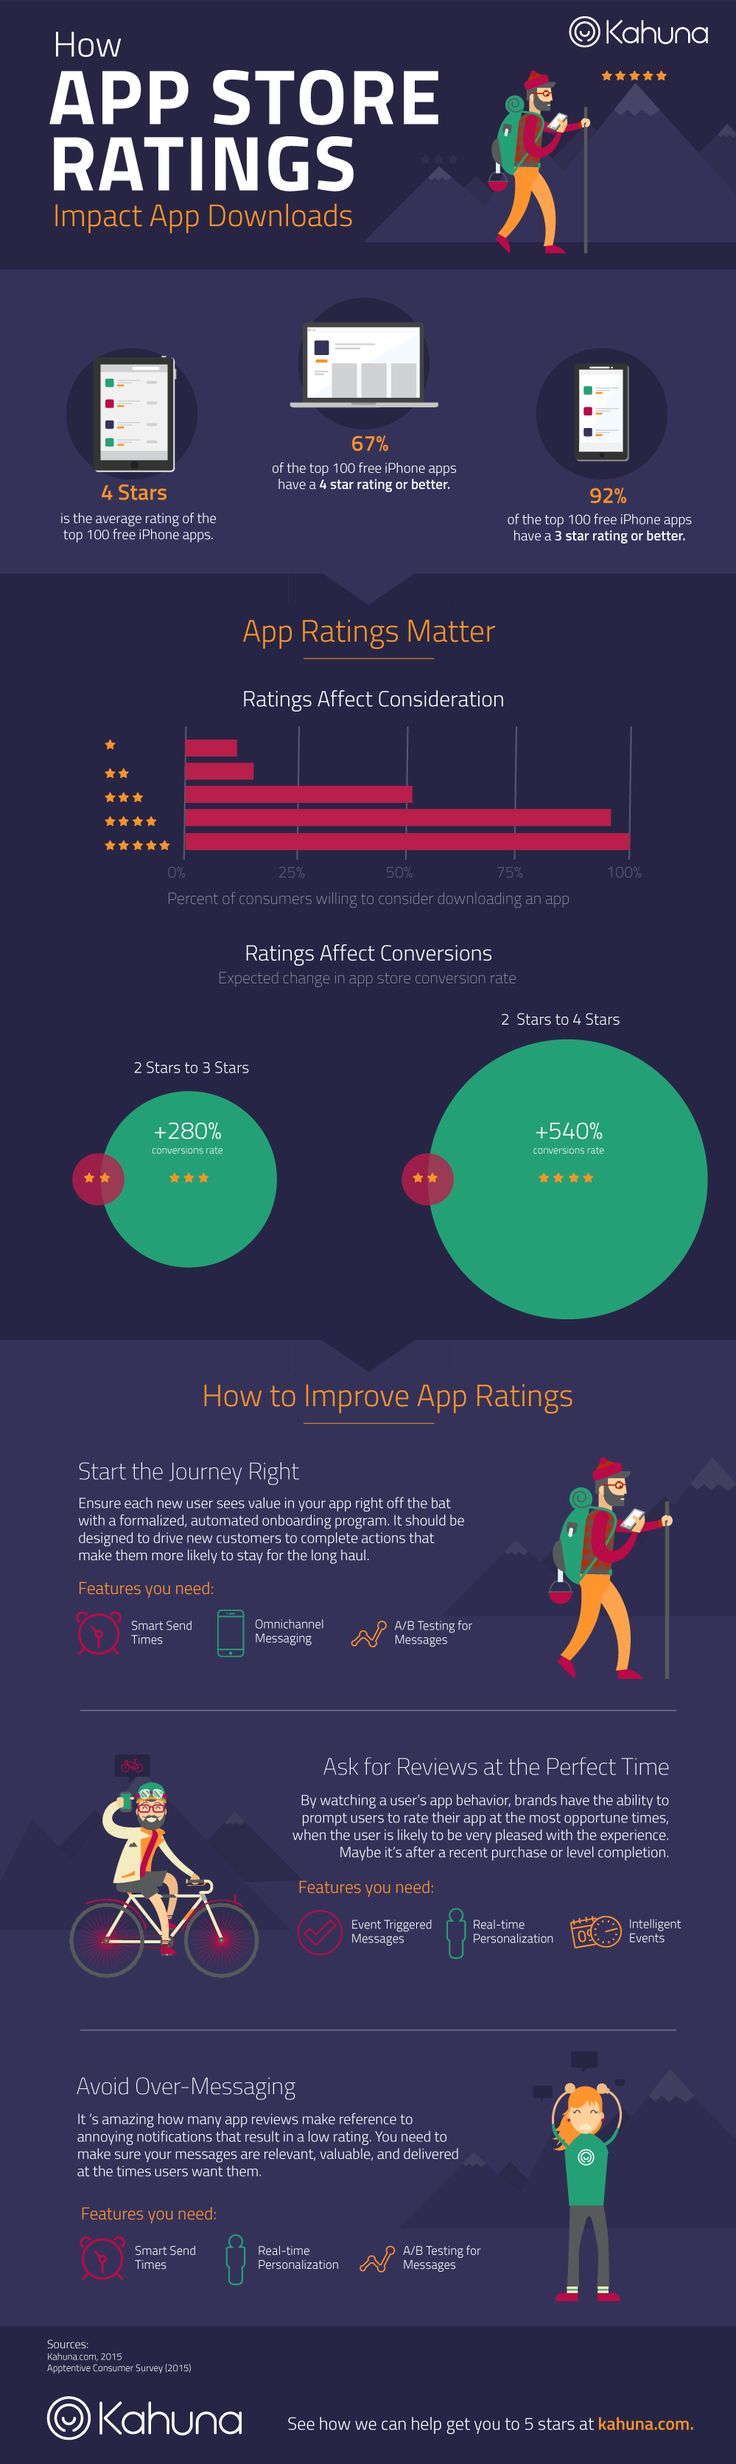 Digital-Marketing-How-App-Store-Ratings-Impact-Downloads-Infographic-Apps Digital Marketing : How App Store Ratings Impact Downloads #Infographic #Apps